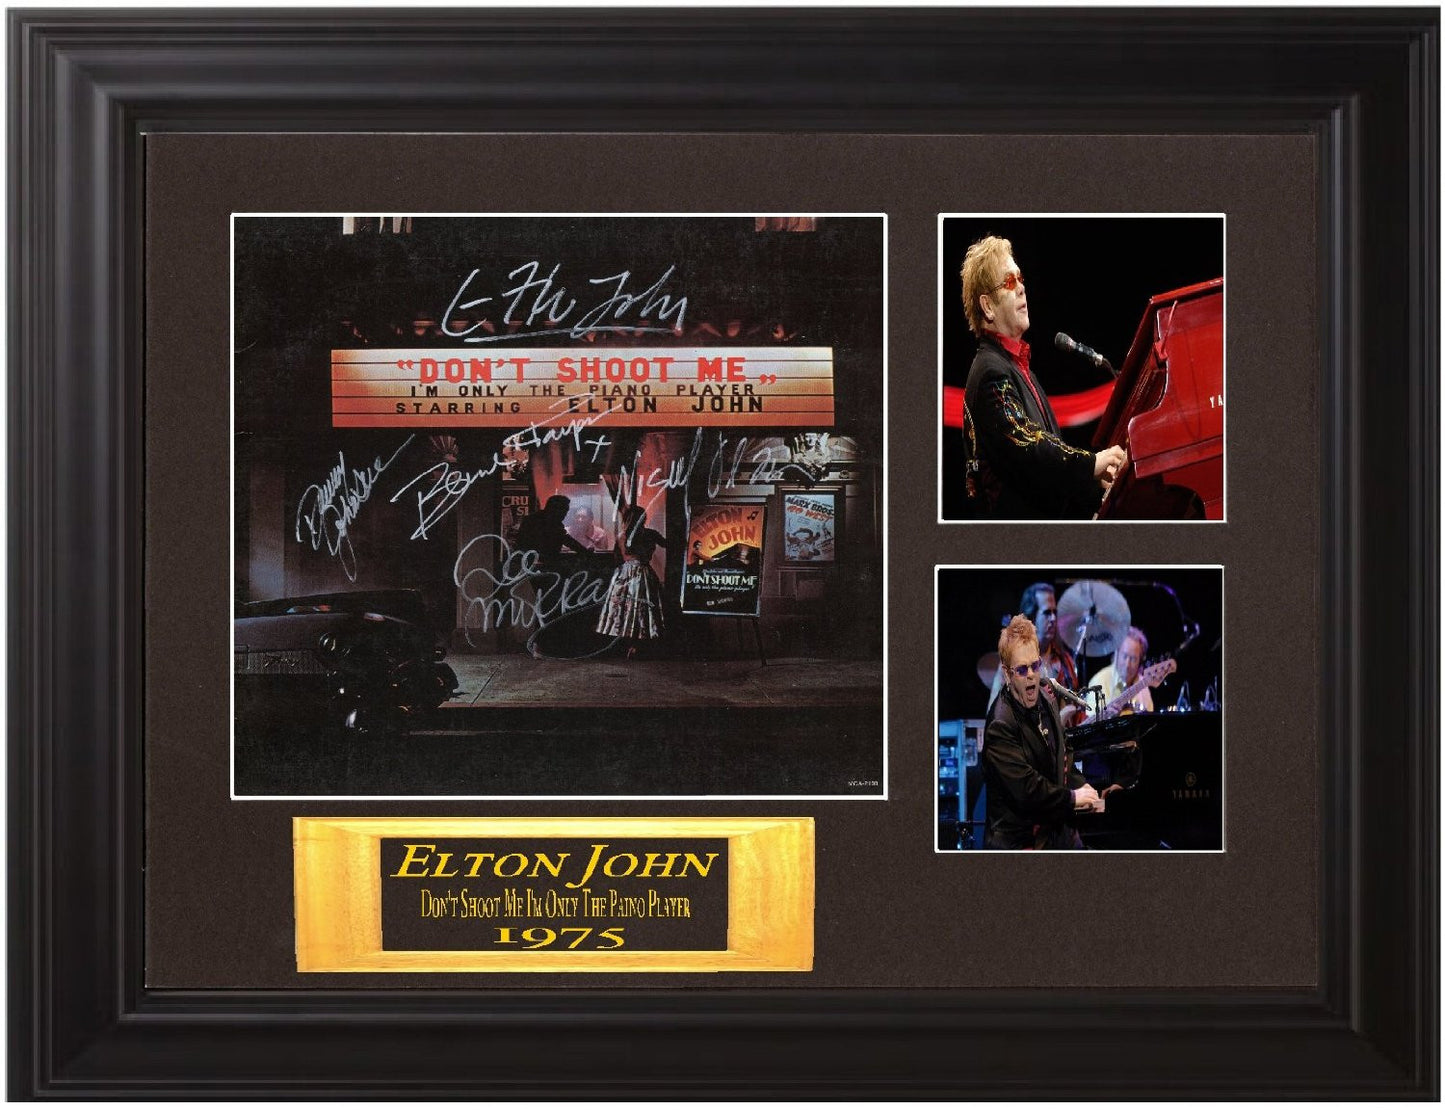 Elton John Autographed Lp "Don't Shoot Me I'm Only the Piano Player" - Zion Graphic Collectibles